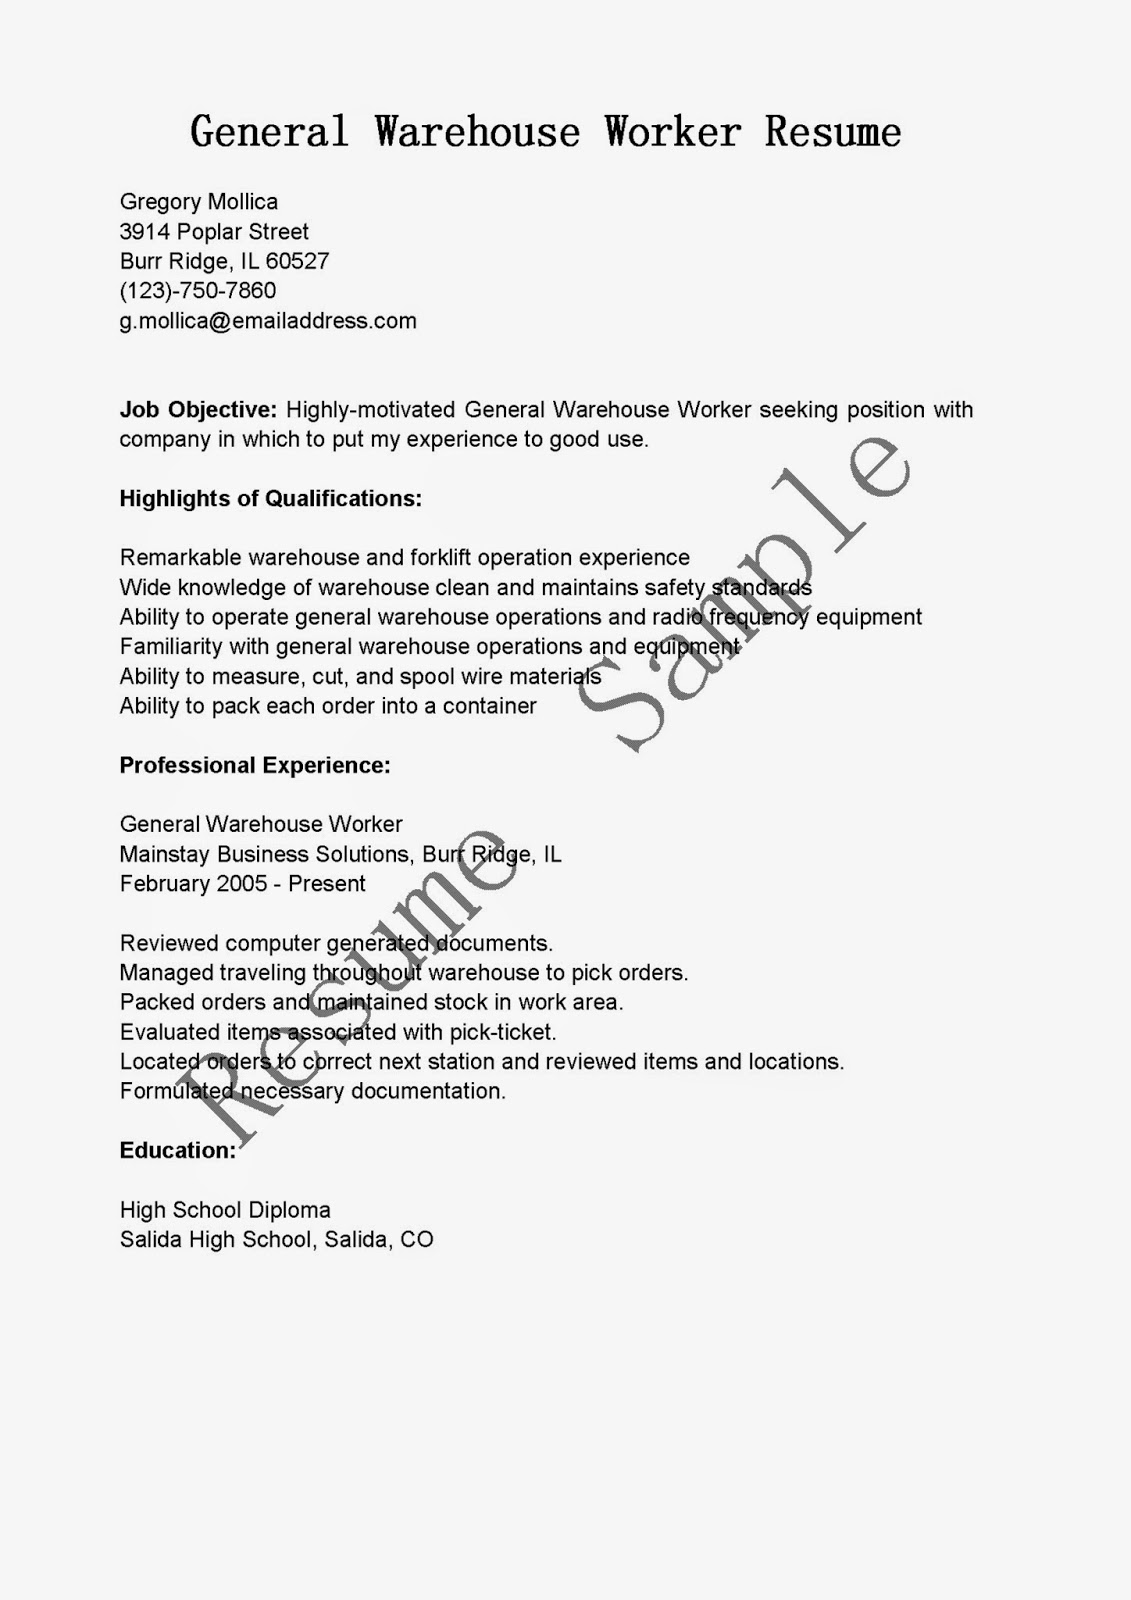 Resume objectives examples for warehouse